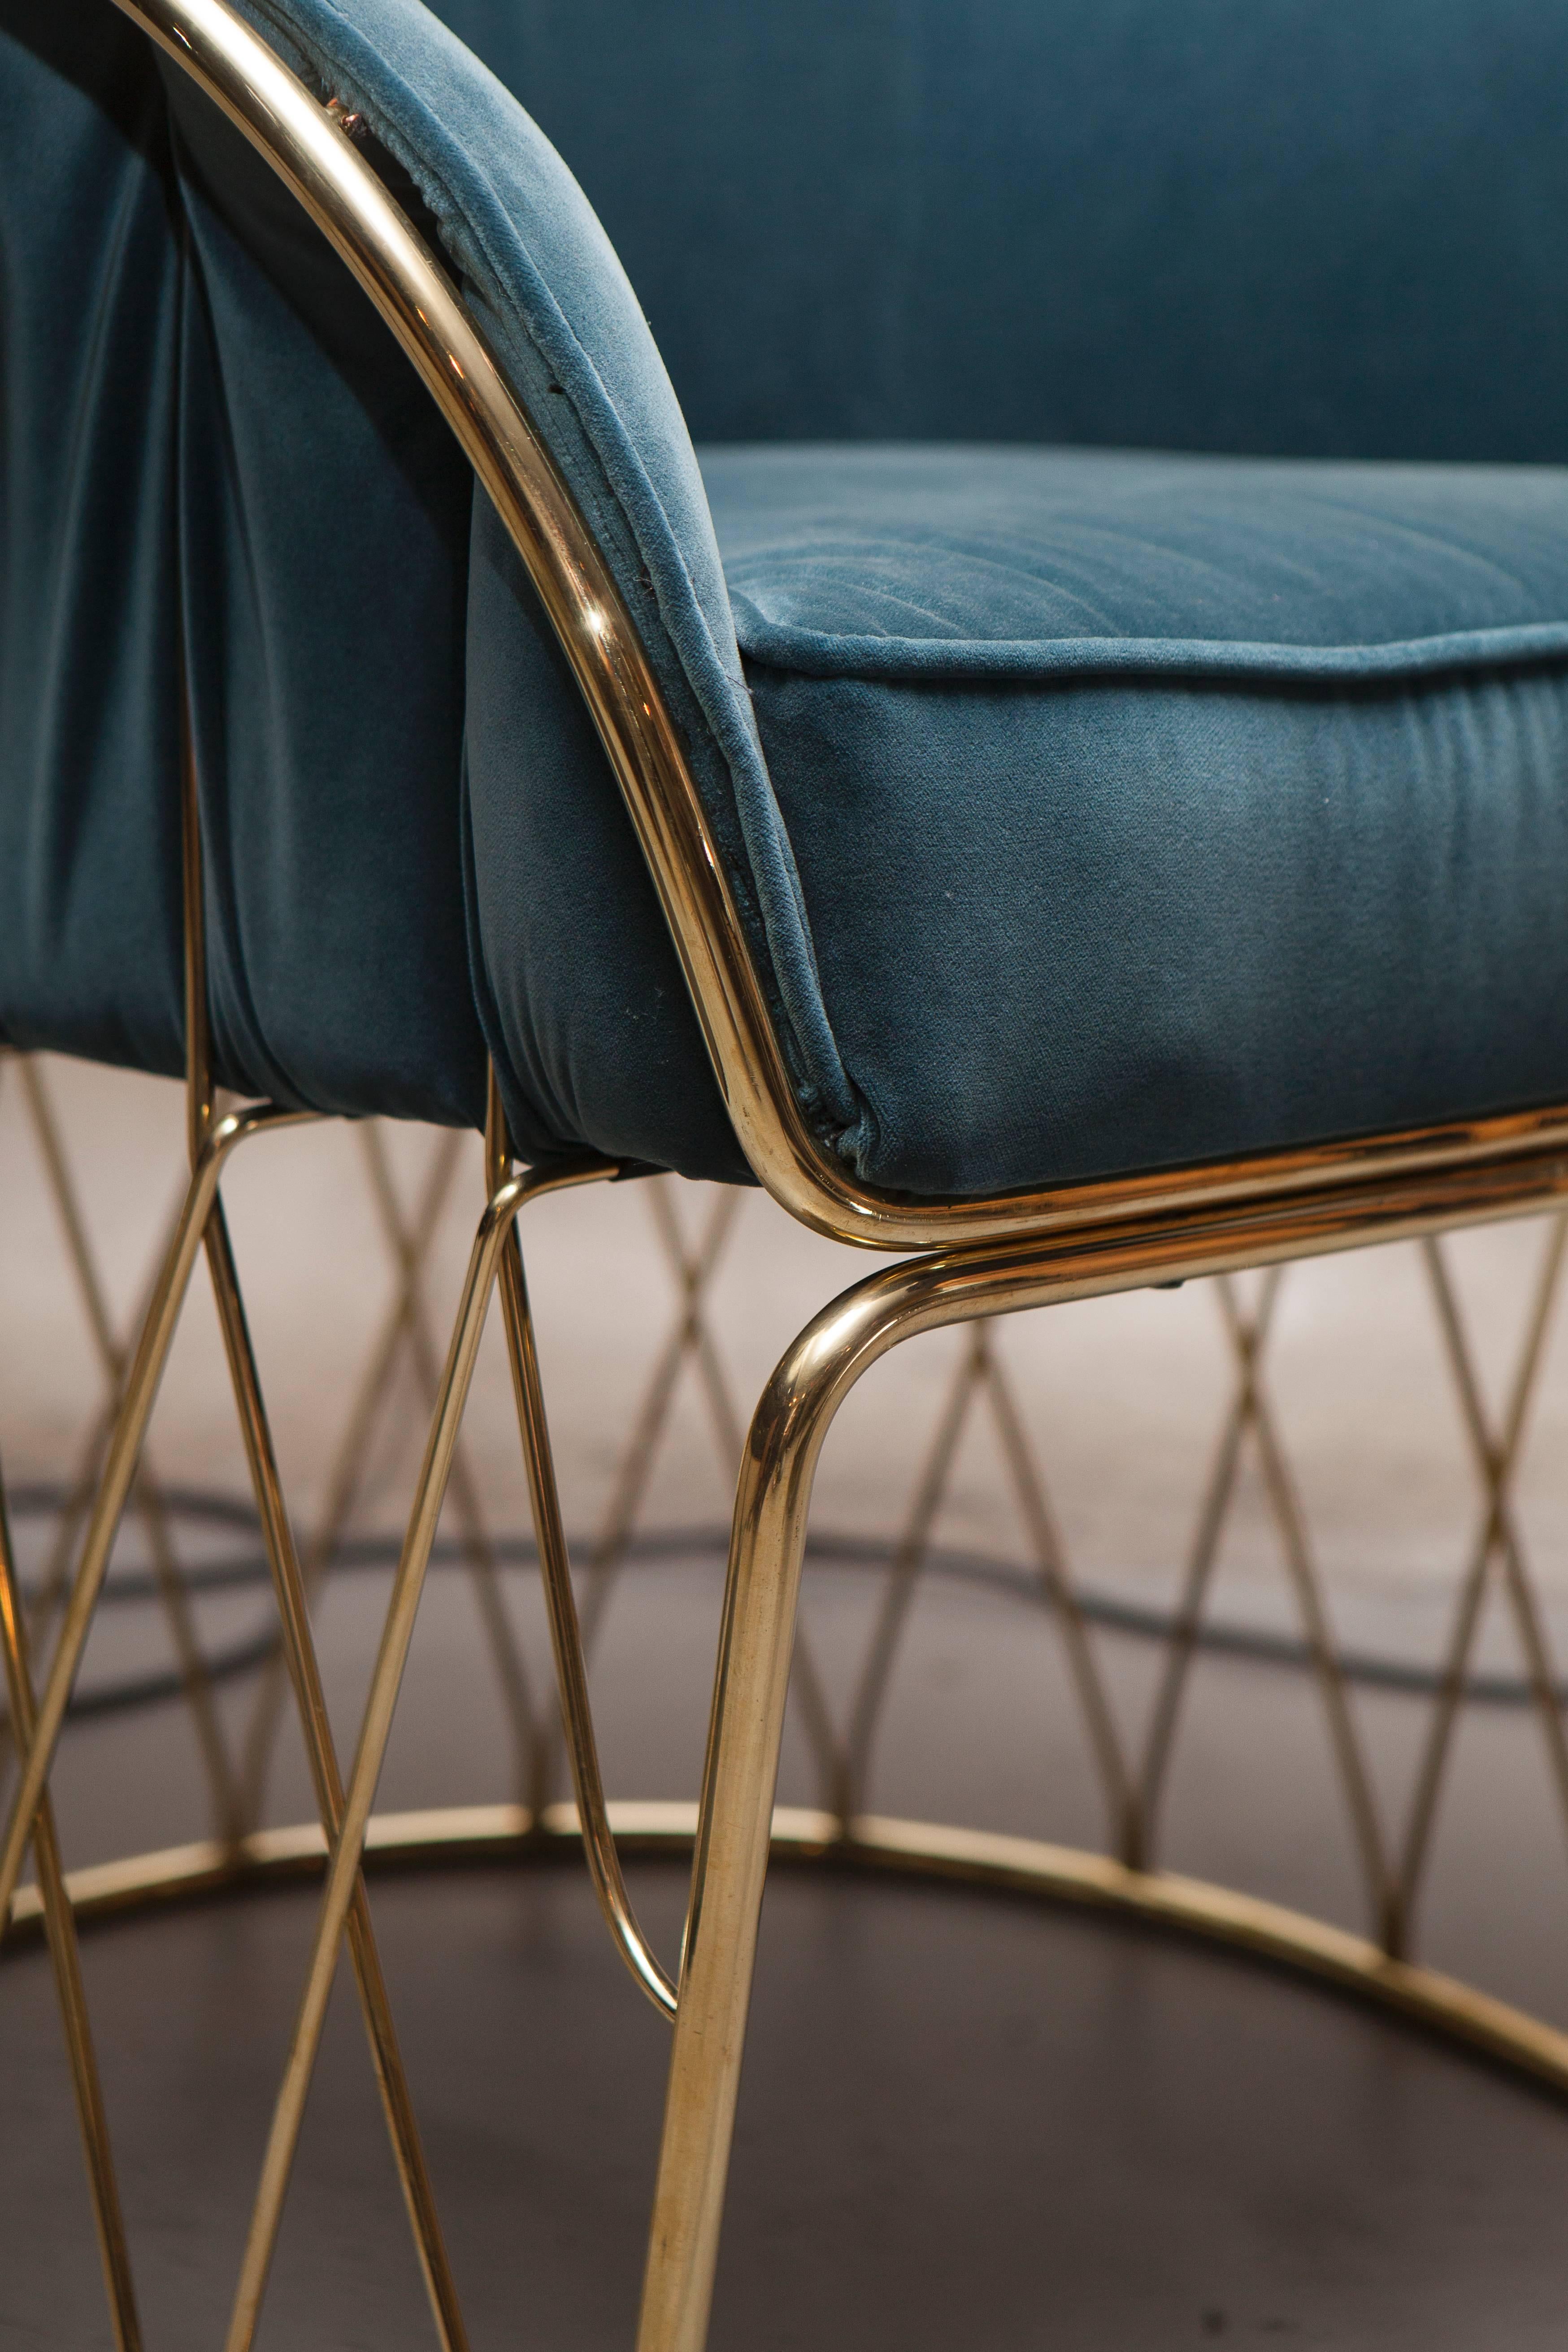 Inspired by the Classic Mexican chair of the same name, Ramírez Vásquez’s architecturally complex signature chair has 36 pieces of solid metal tubing perfectly formed to counter lever the seat of this chair. Not only technically brilliant and